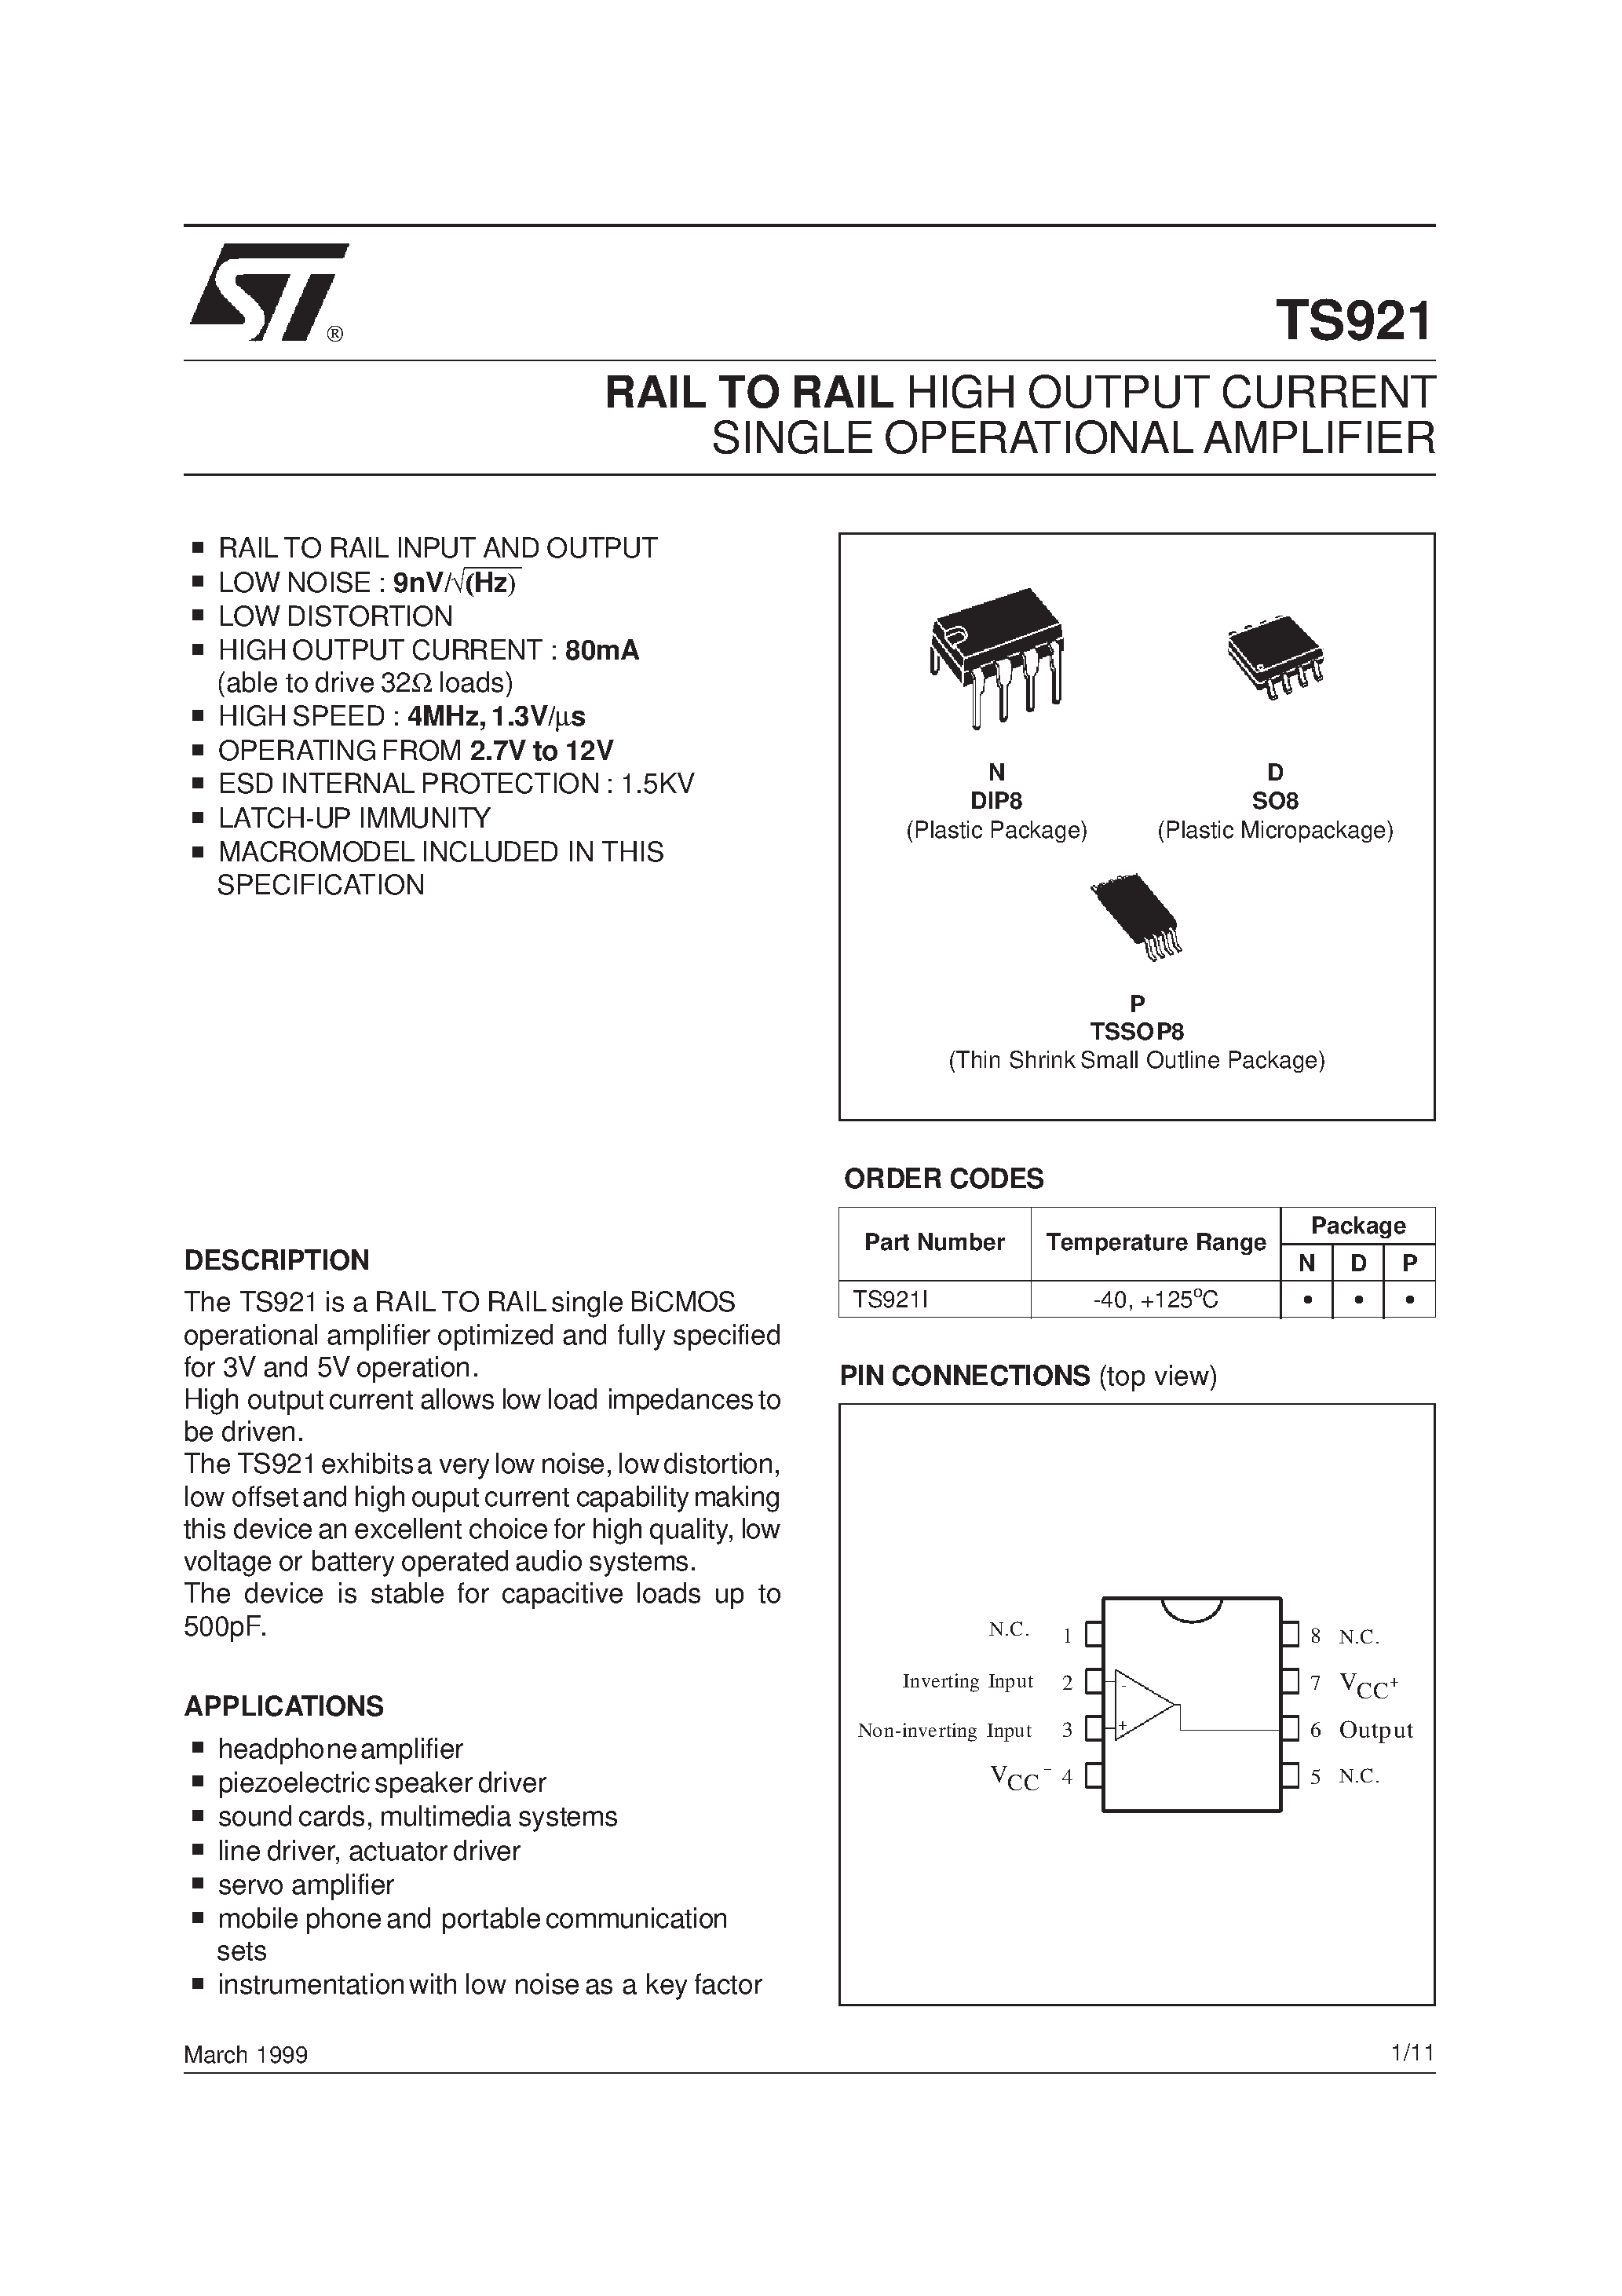 Datasheet TS921 - RAIL TO RAIL HIGH OUTPUT CURRENT QUAD OPERATIONAL AMPLIFIER page 1